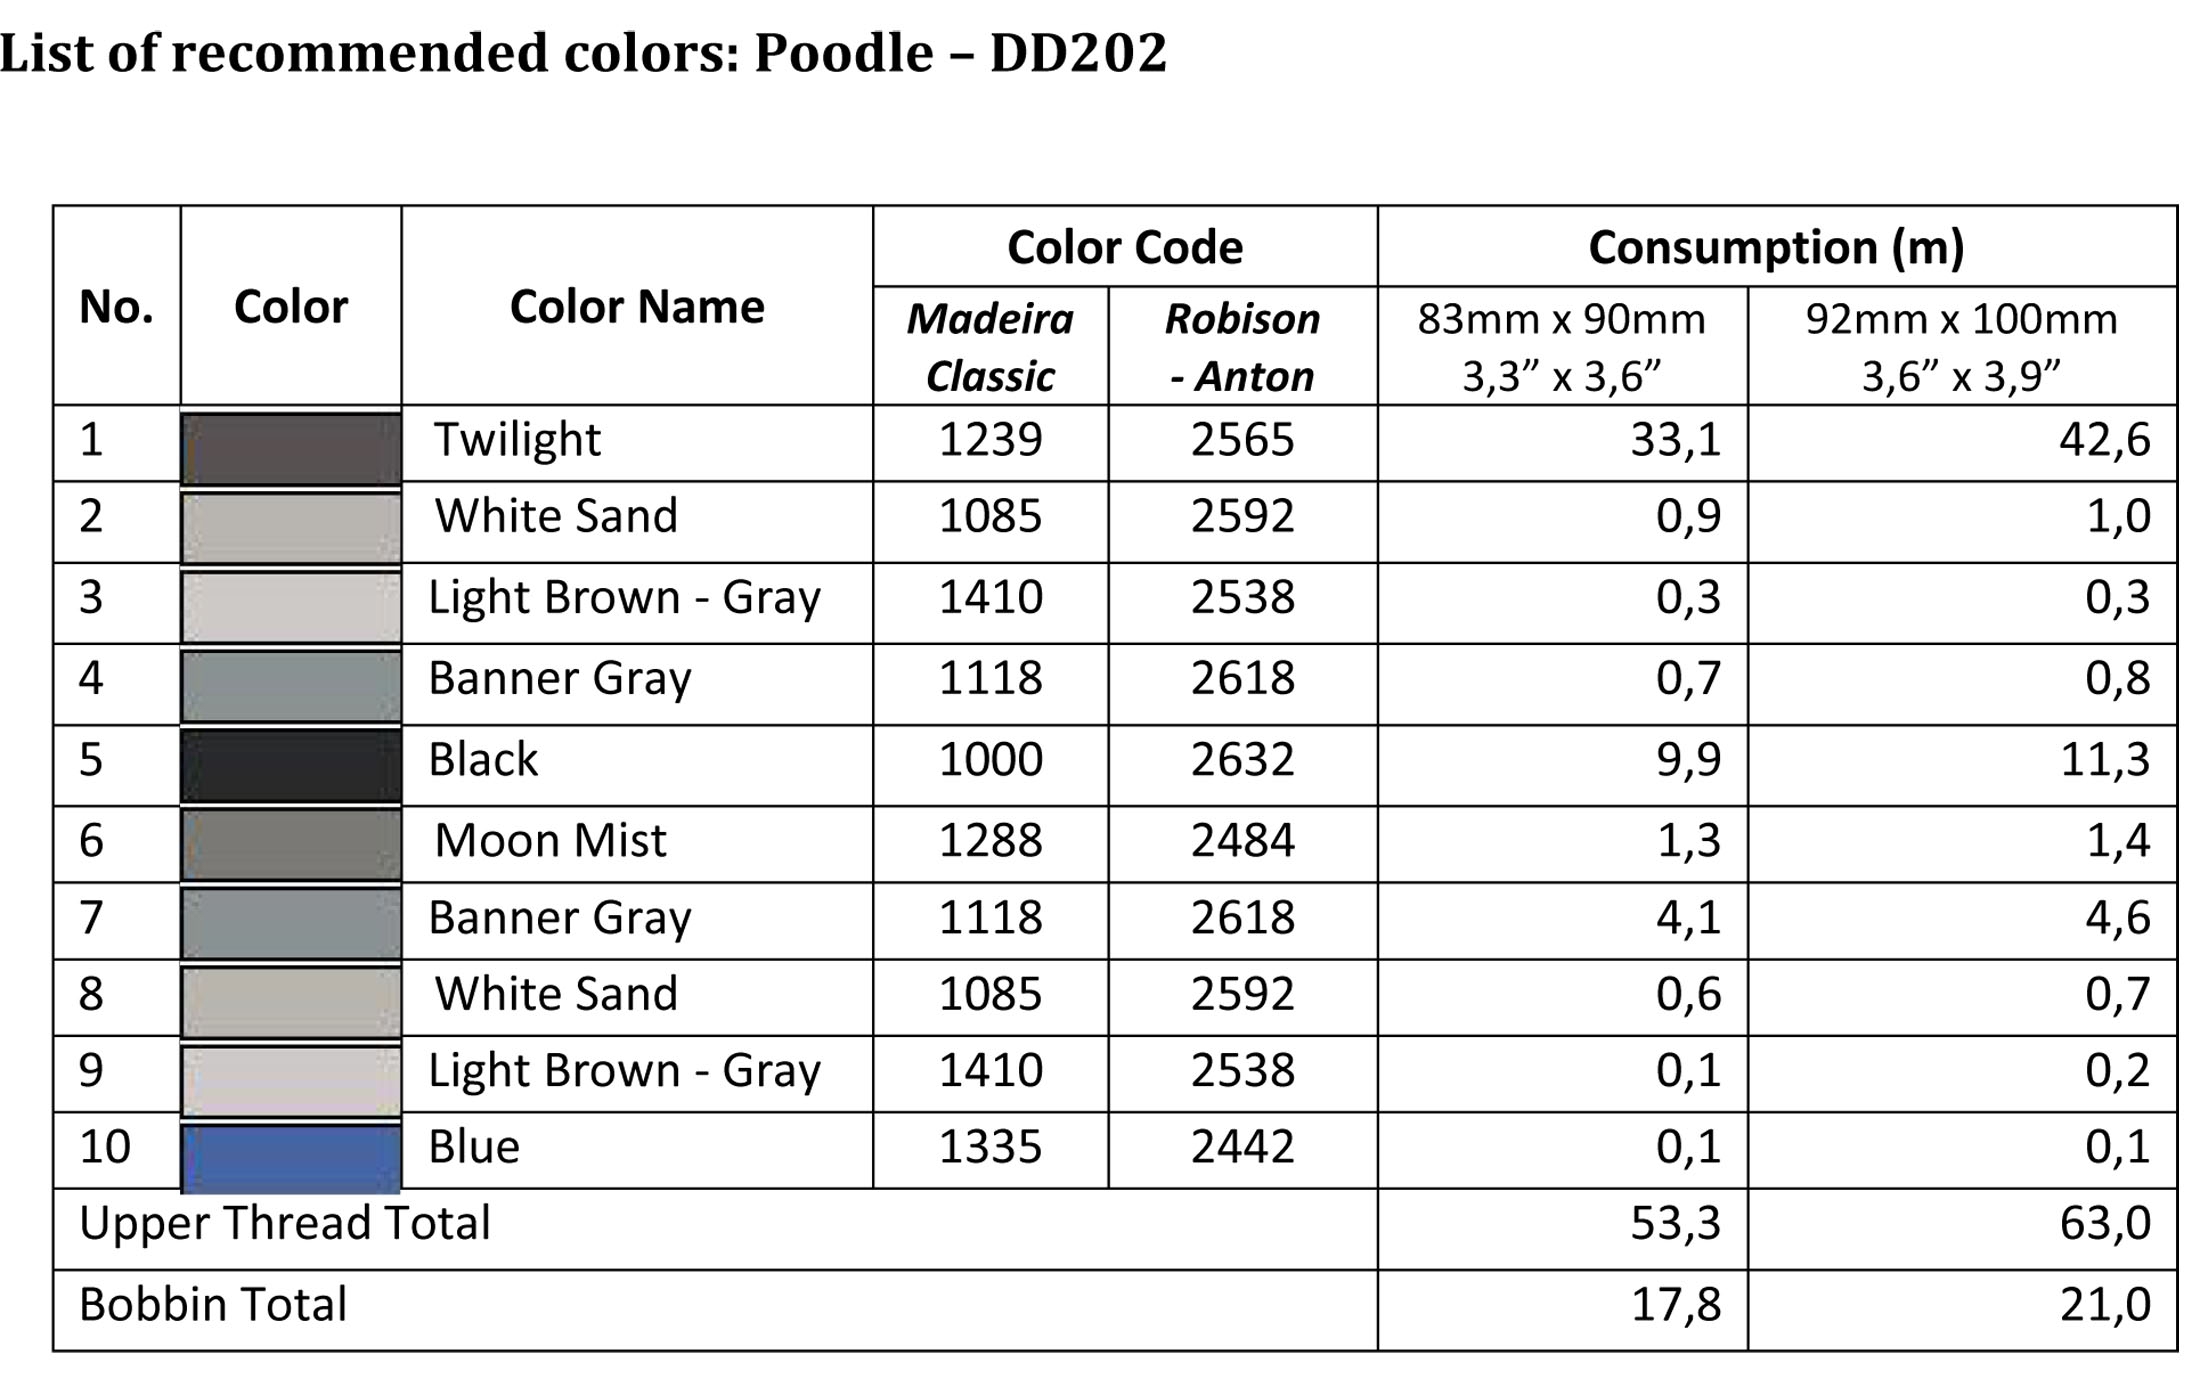 List of recommended colors - DD202